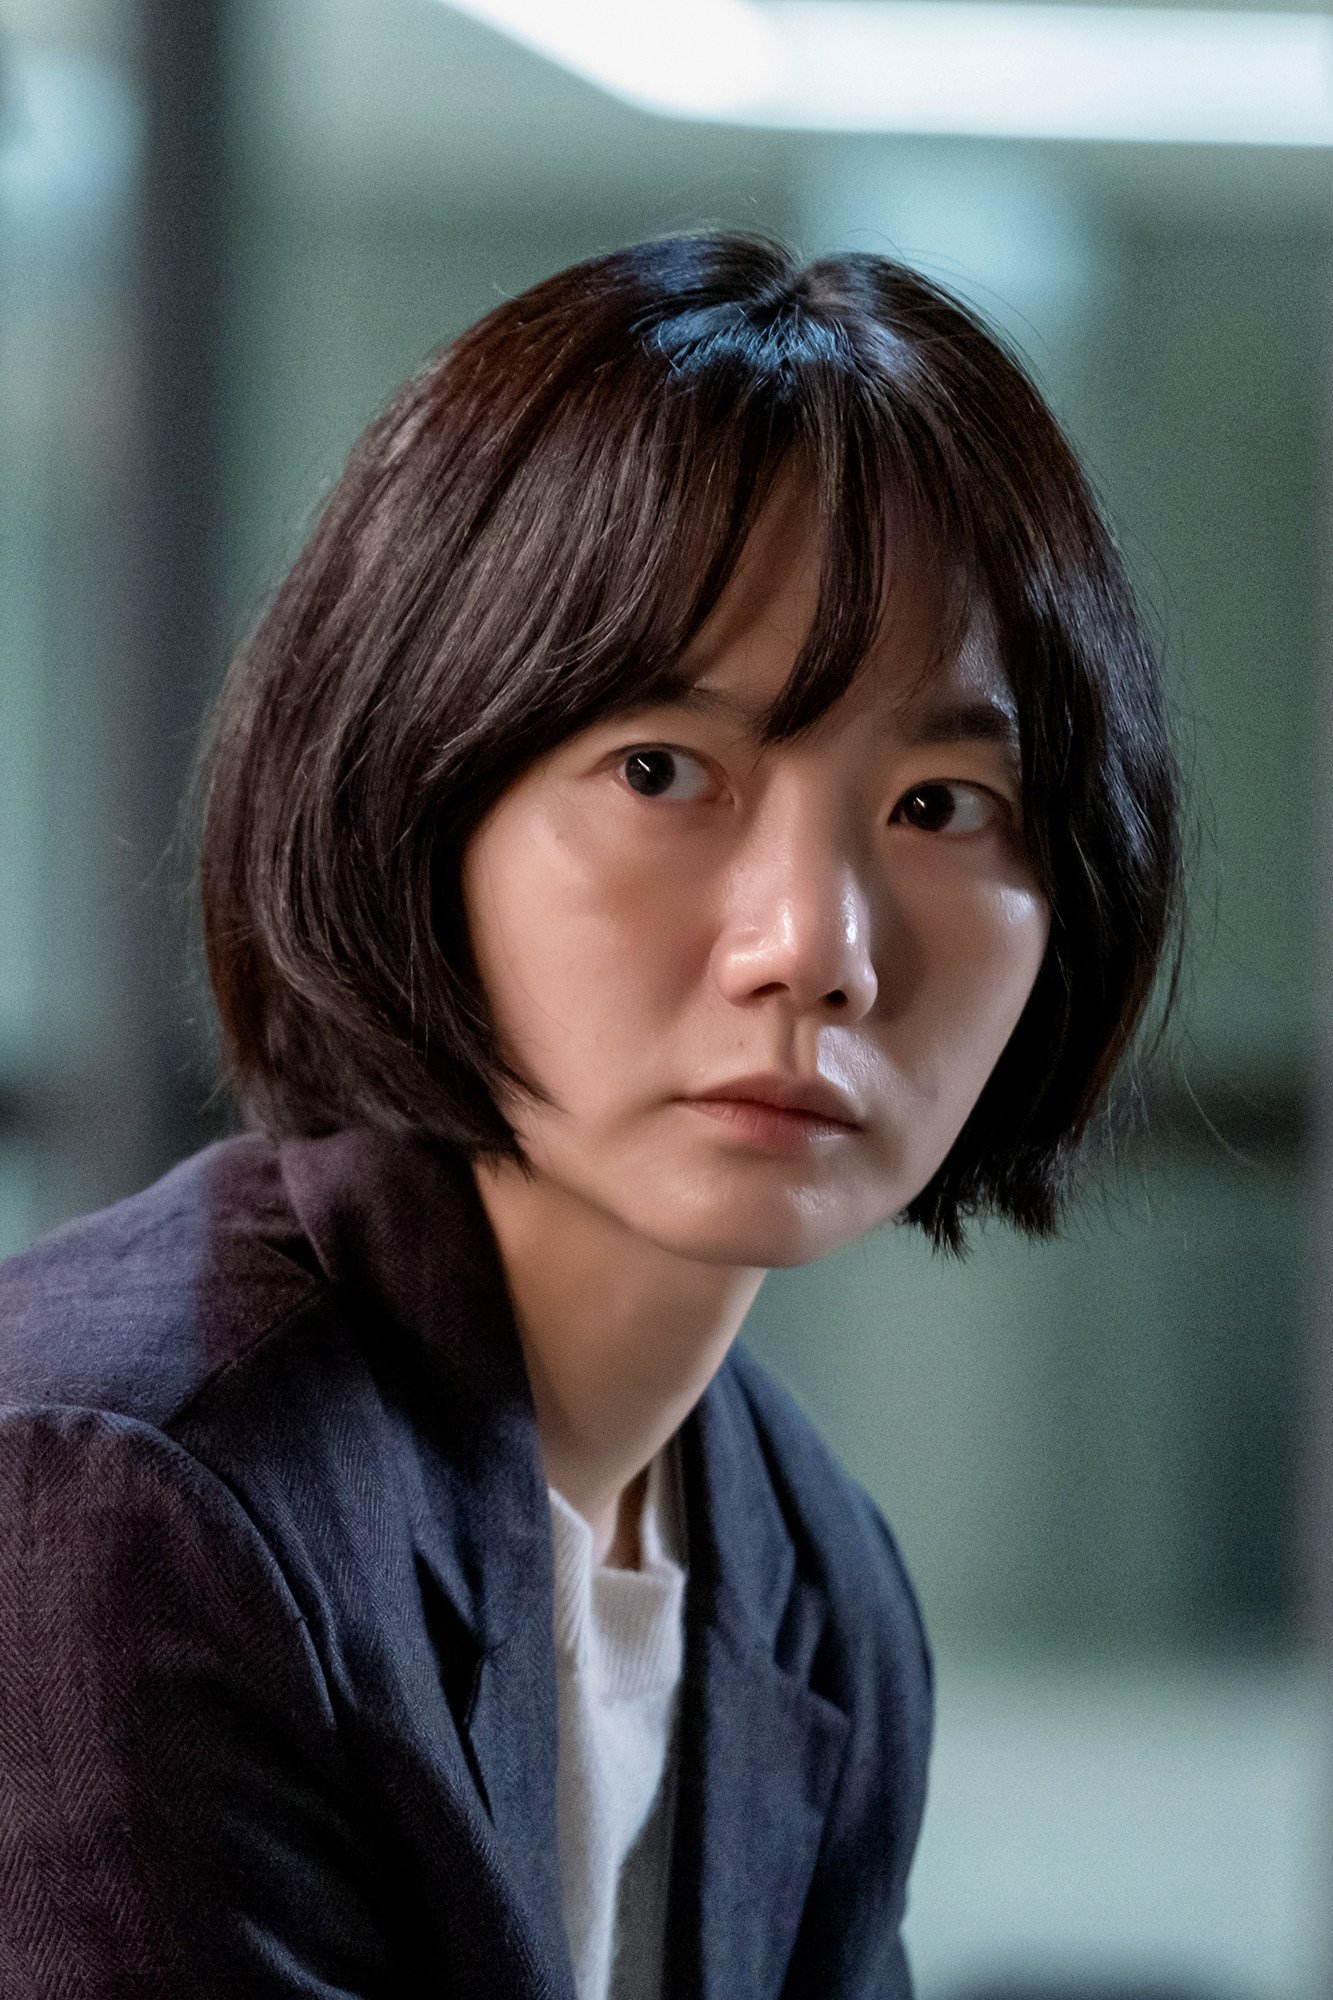 Bae Doona Net Worth - Employment Security Commission